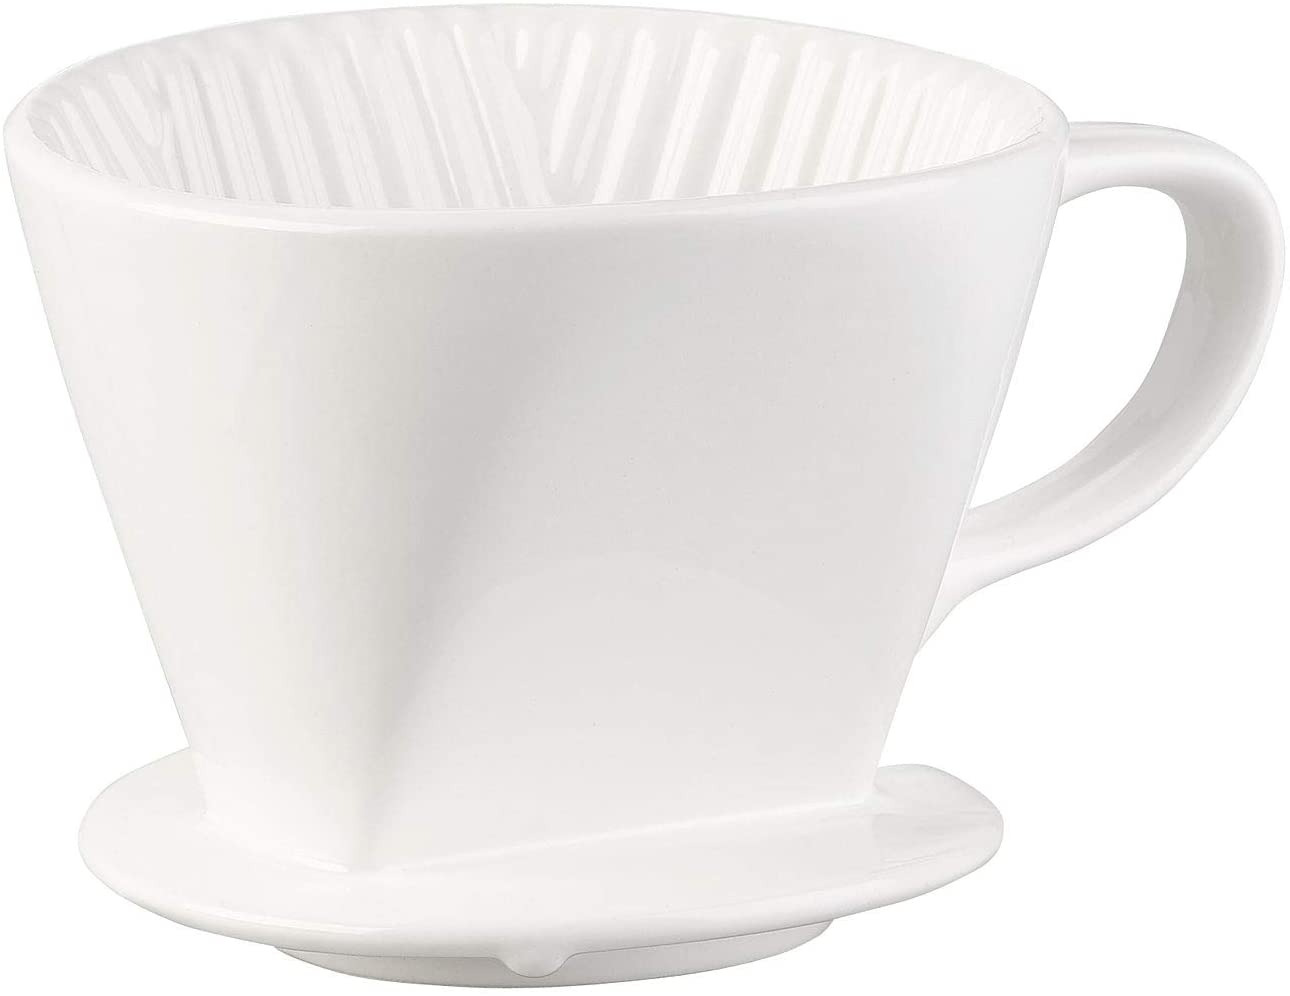 Rosenstein & Söhne Ceramic Coffee Filter Porcelain for Filter Bags Size 2 up to 4 Cups White (Porcelain Coffee Filter Holder)